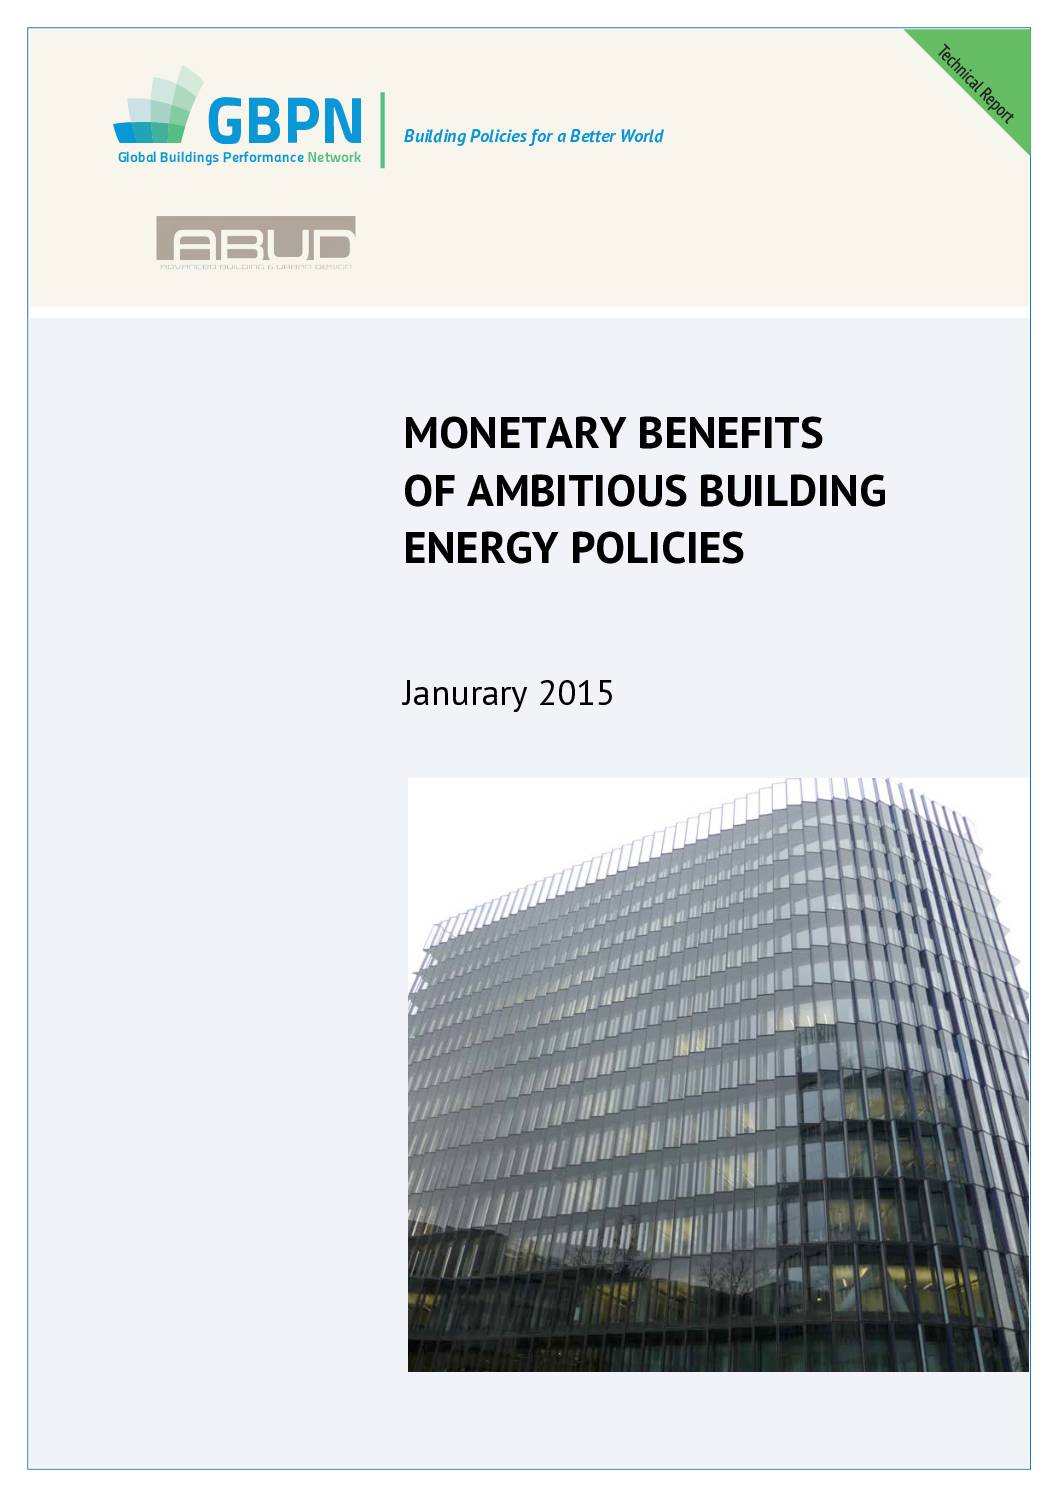 Monetary Benefits of Ambitious Building Energy Policies